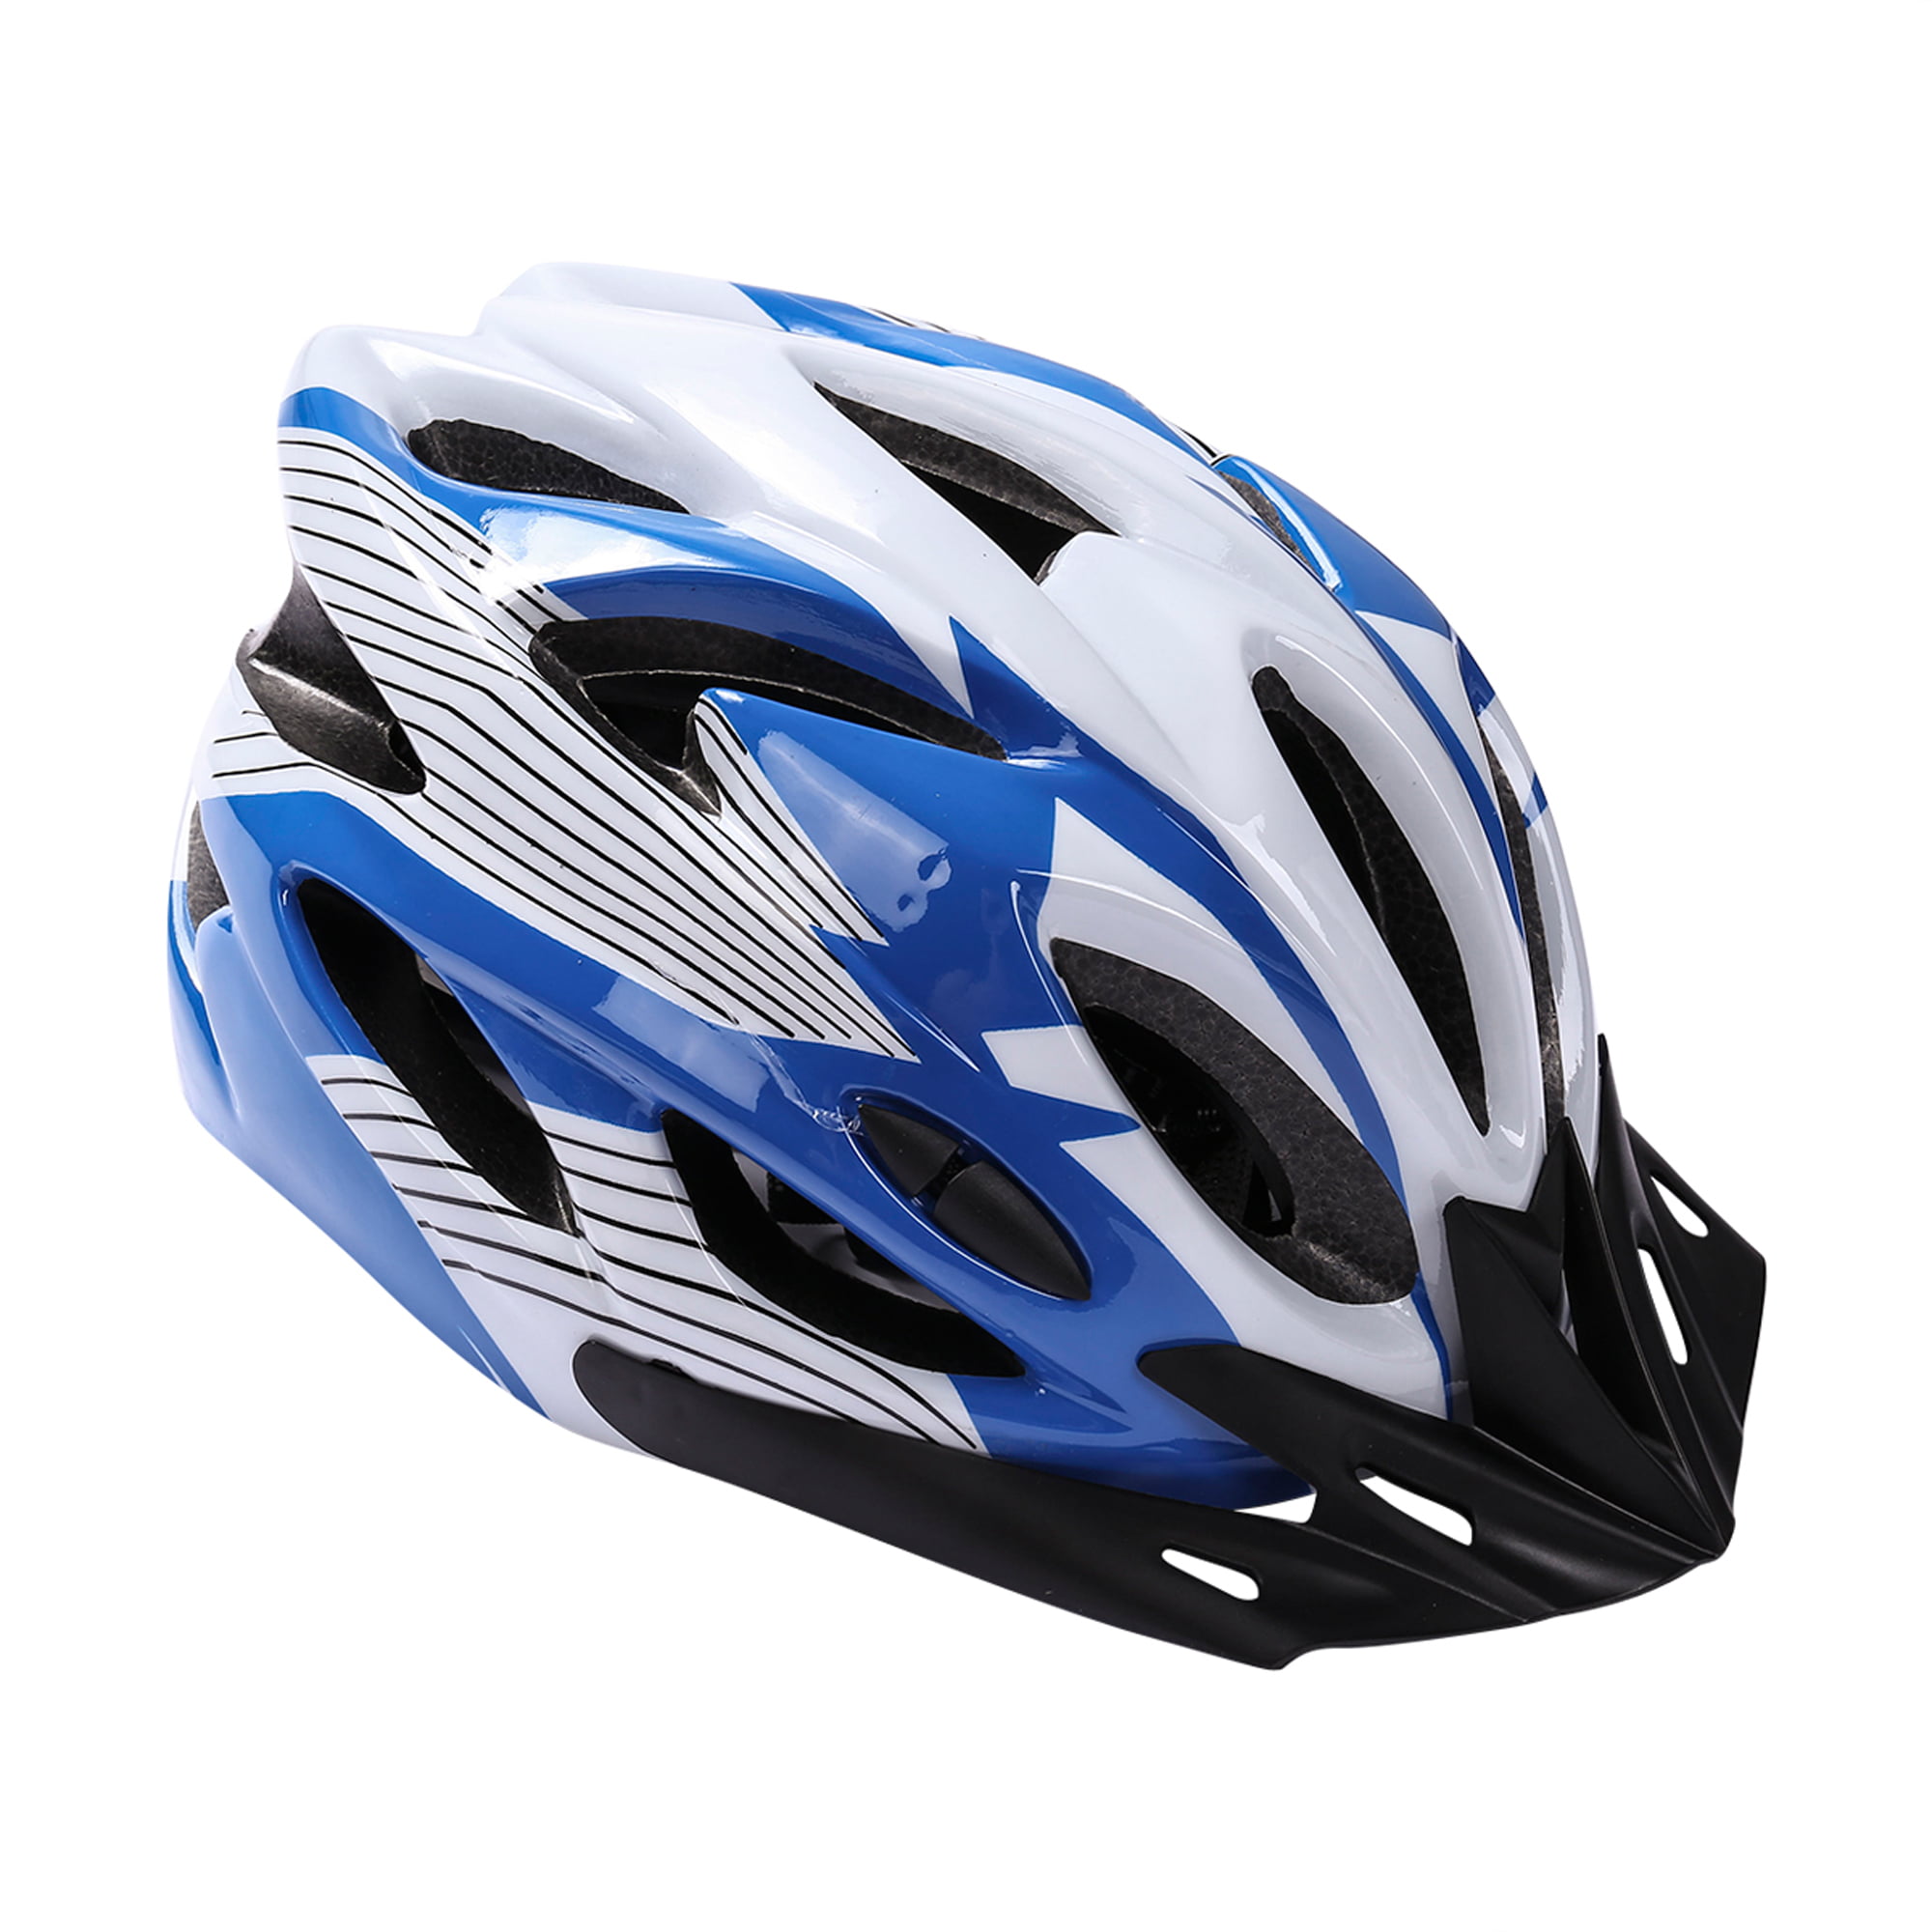 Details about   Mountain Bike Universal helmet Specialized For Adult Teen Men Women Cycling 